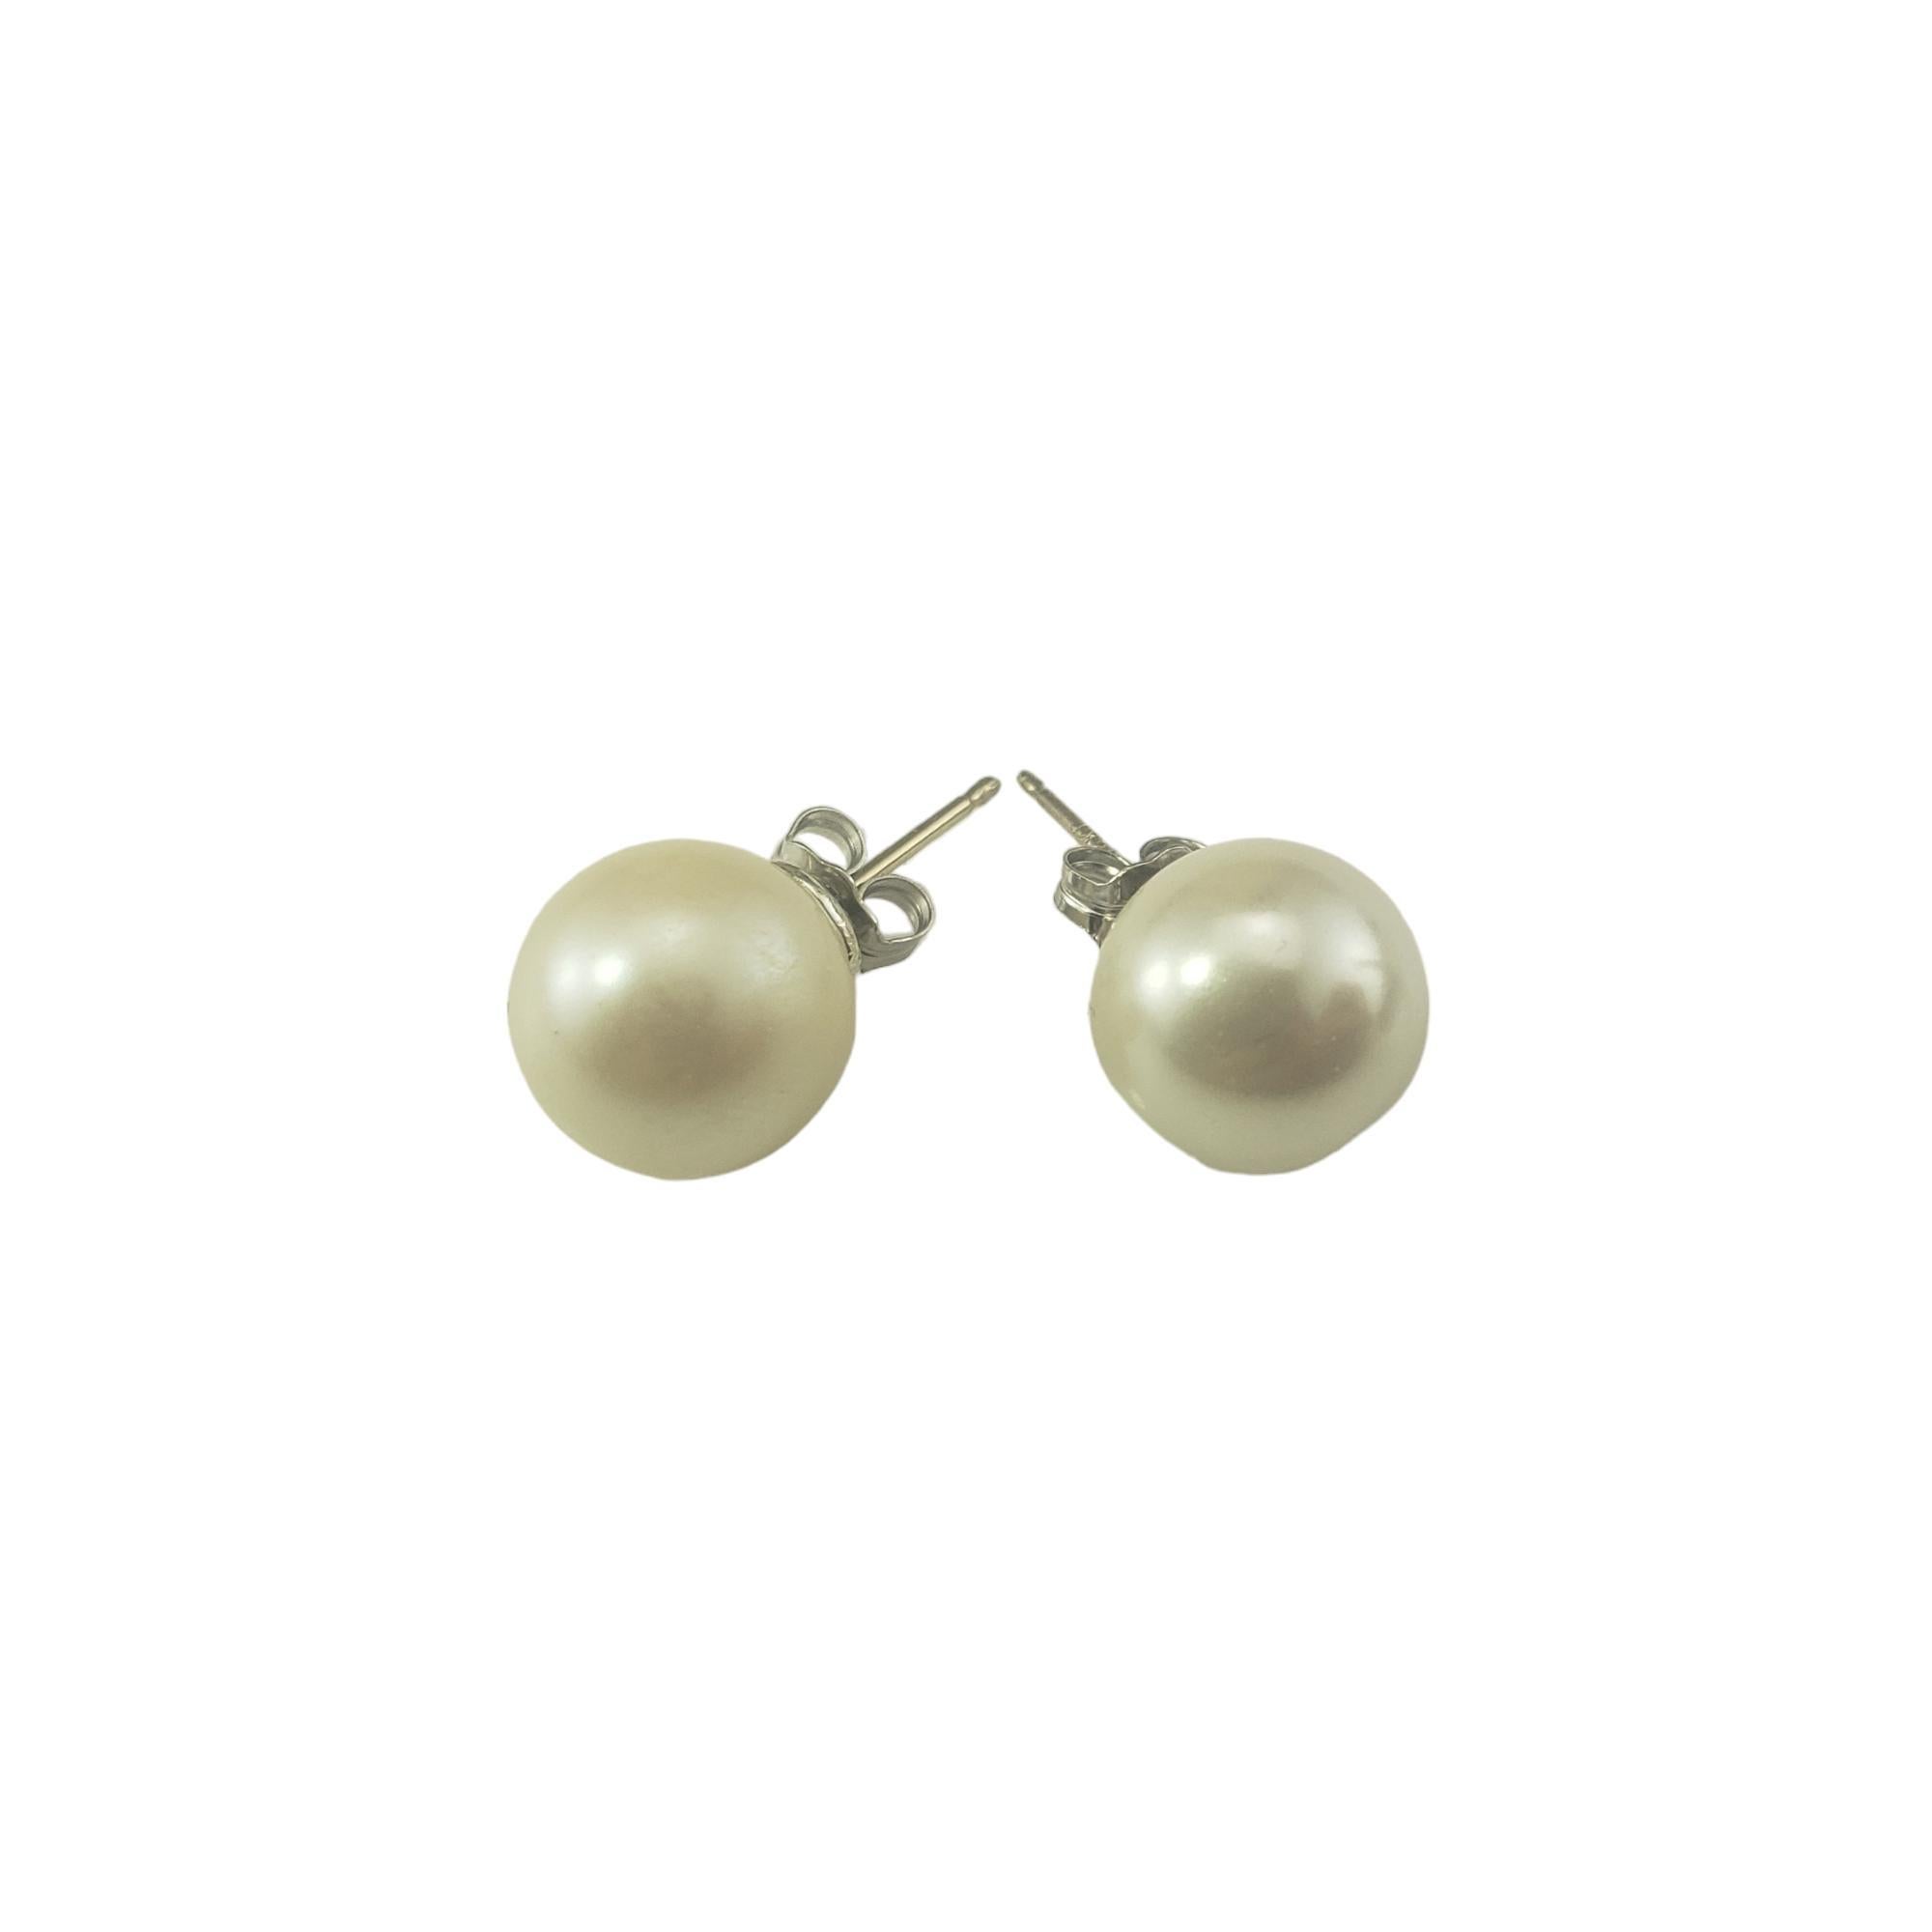 14K White Gold Pearl Stud Earrings-

These elegant stud earrings each feature one round pearl (10 mm) set in classic 14K white gold.  Push back closures. 

Size: 10 mm

Stamped: 14KT

Weight:  1.5 dwt./ 2.4 gr.

Very good condition, professionally